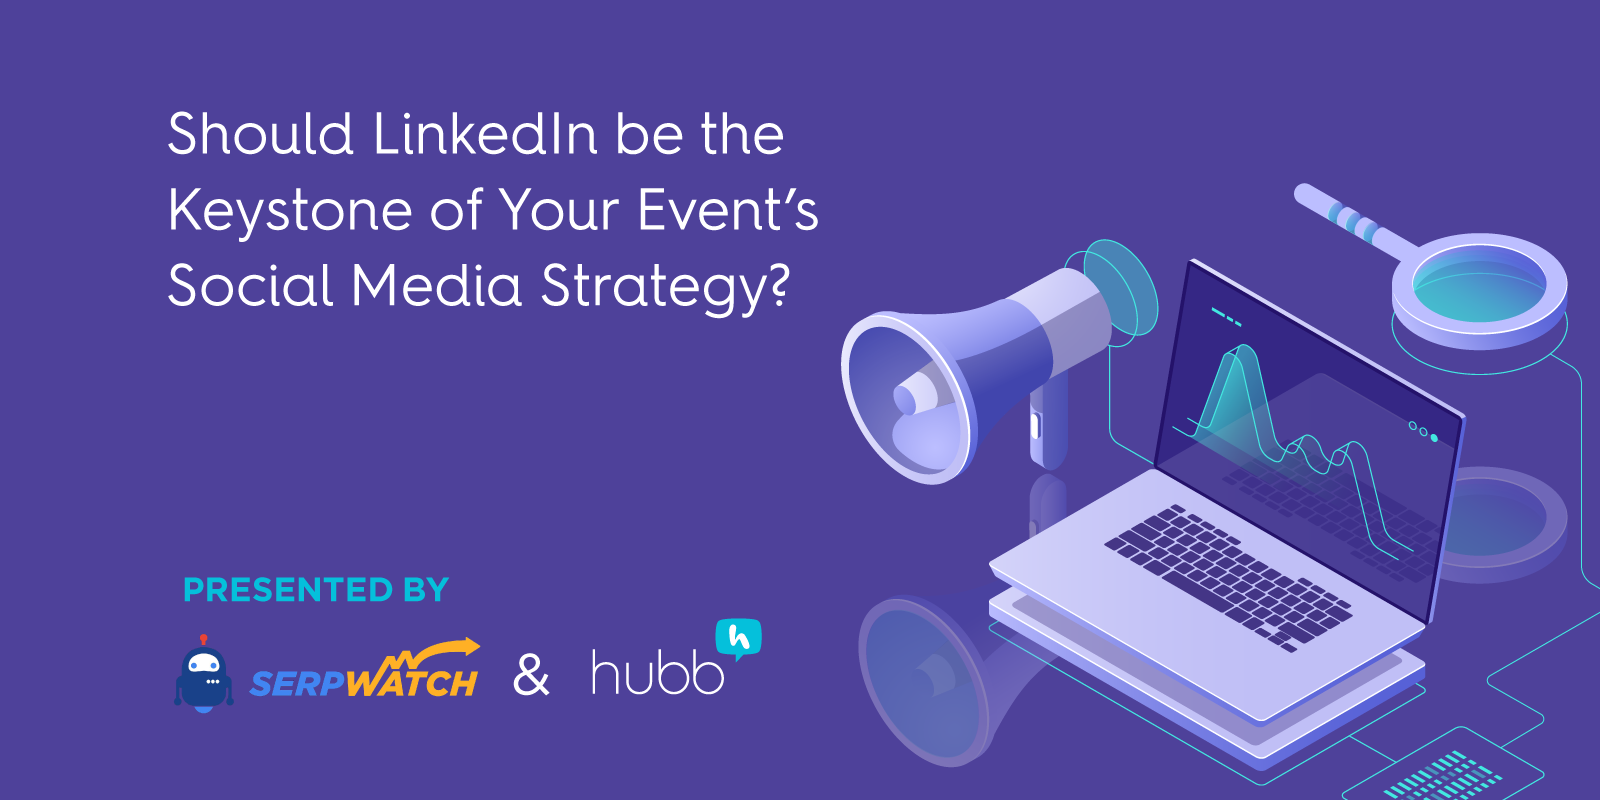 Should LinkedIn be the Keystone of Your Event's Social Media Strategy?